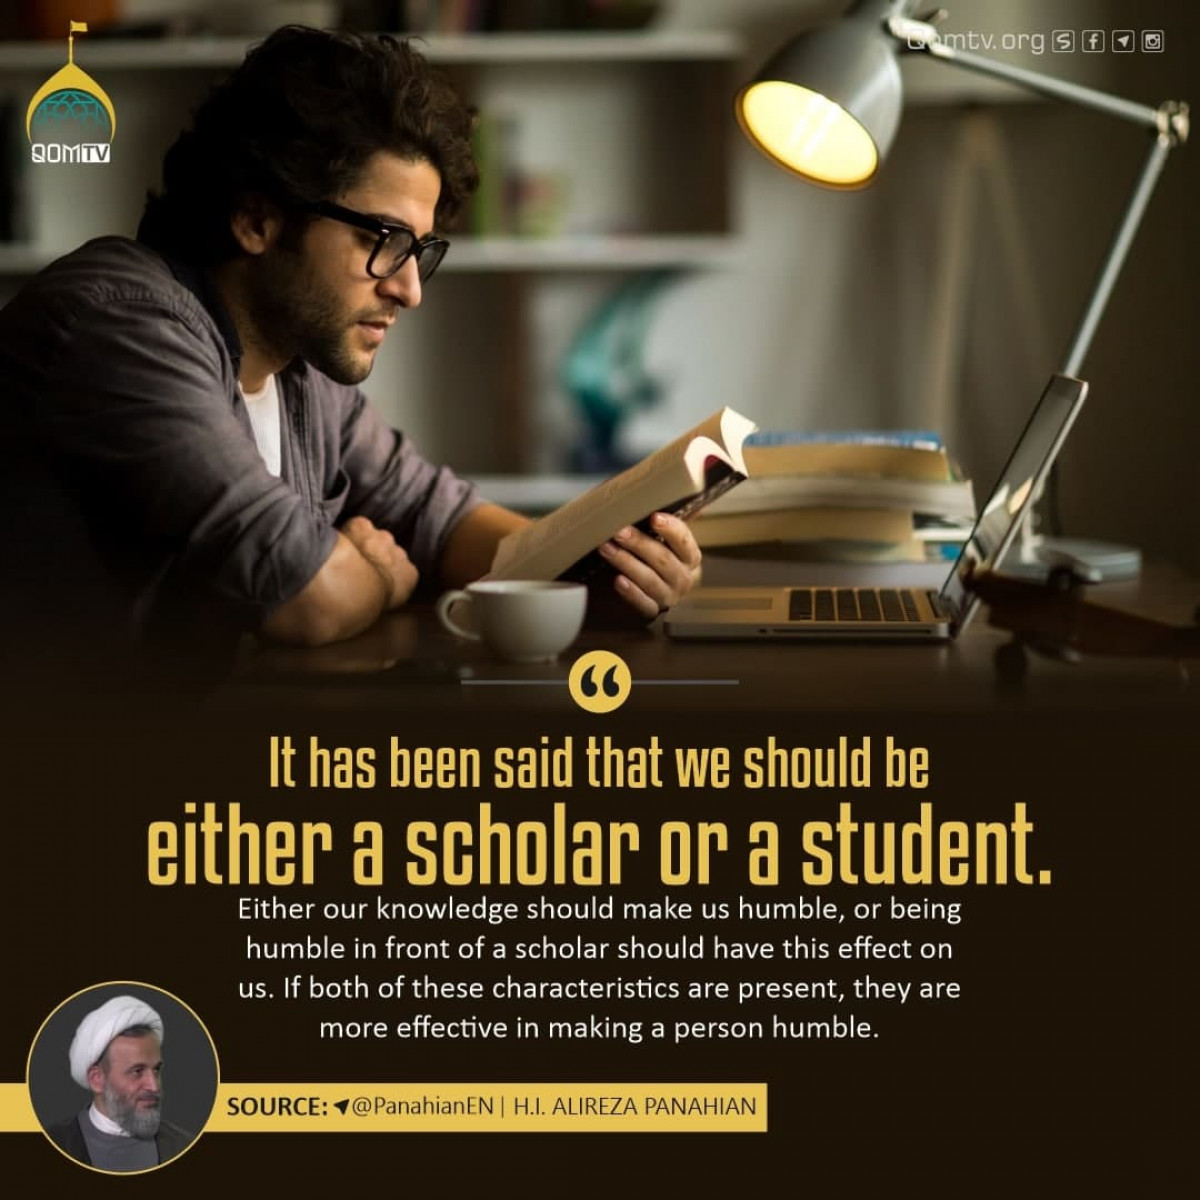 It has been said that we should be either a scholar or a student